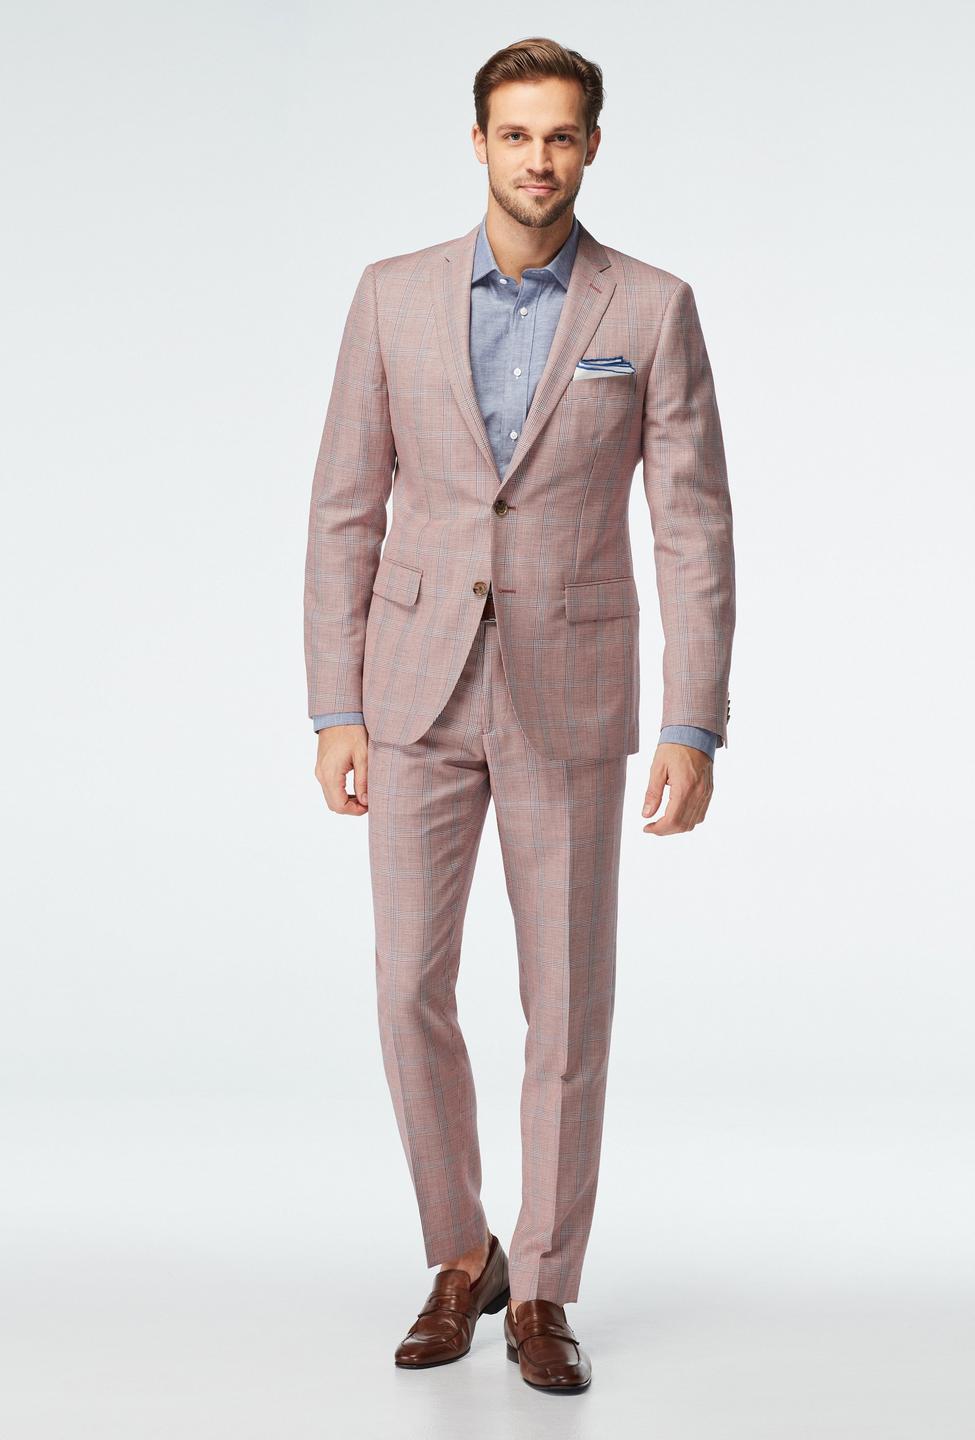 Red suit - Southport Houndstooth Design from Seasonal Indochino Collection